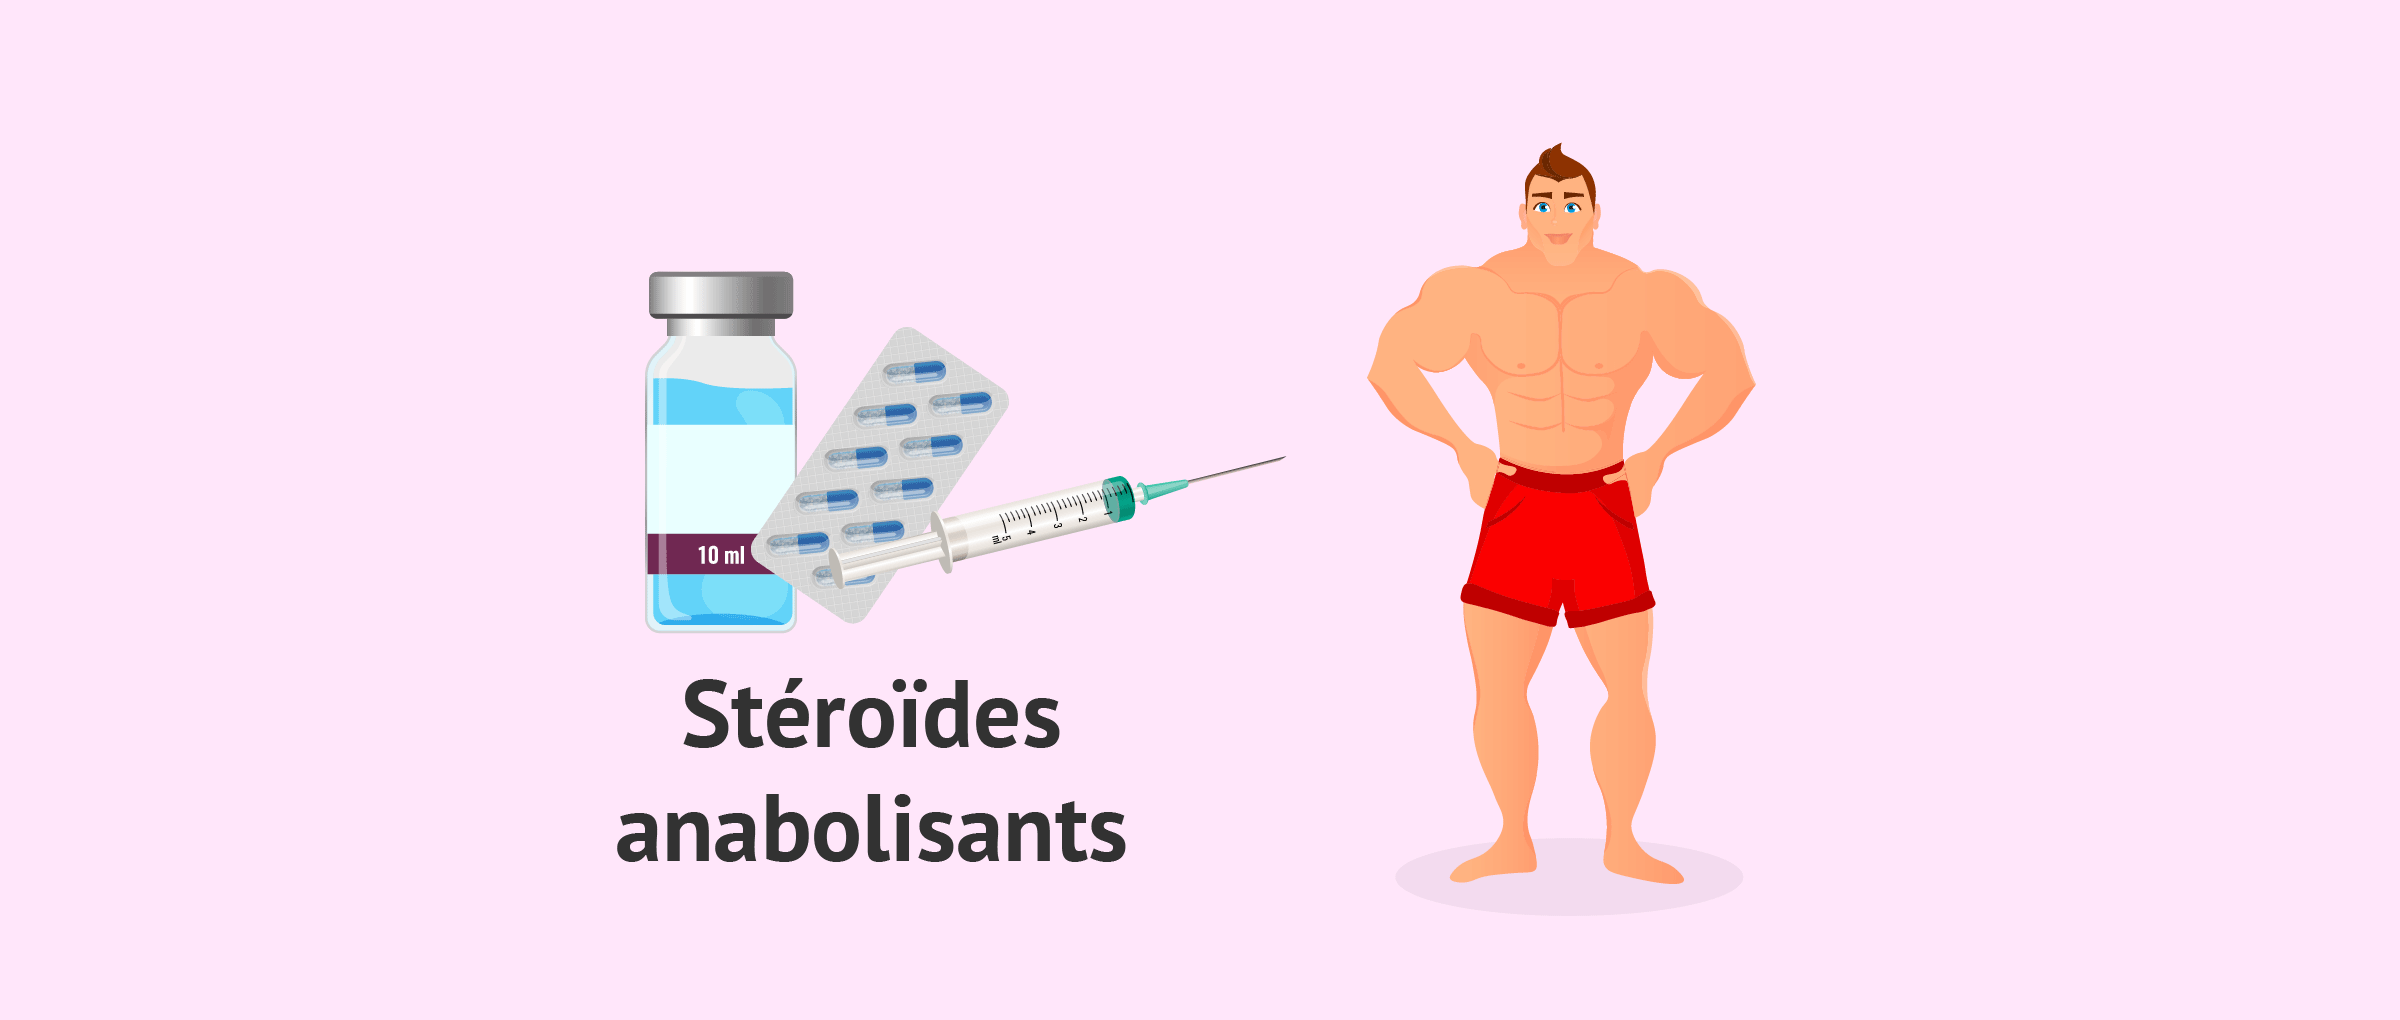 steroide definition Shortcuts - The Easy Way